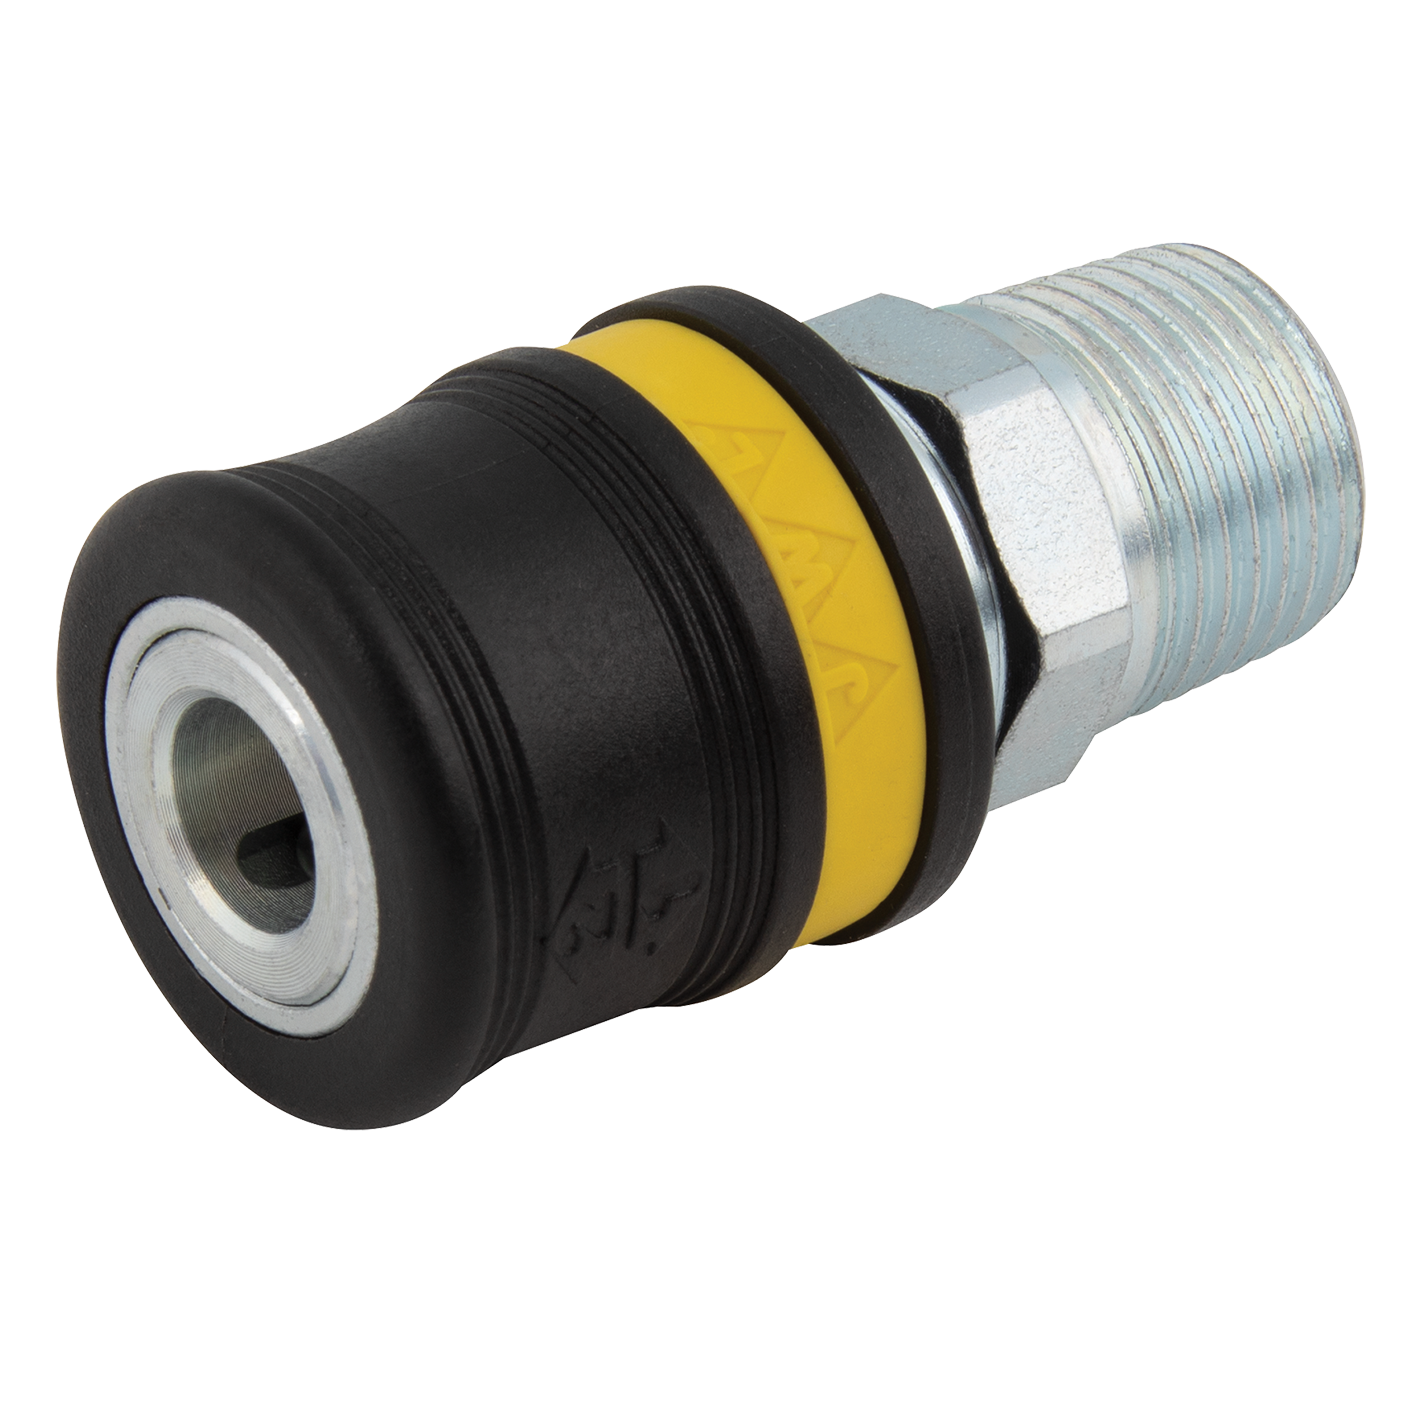 1/2" BSPT Male Safety Coupling